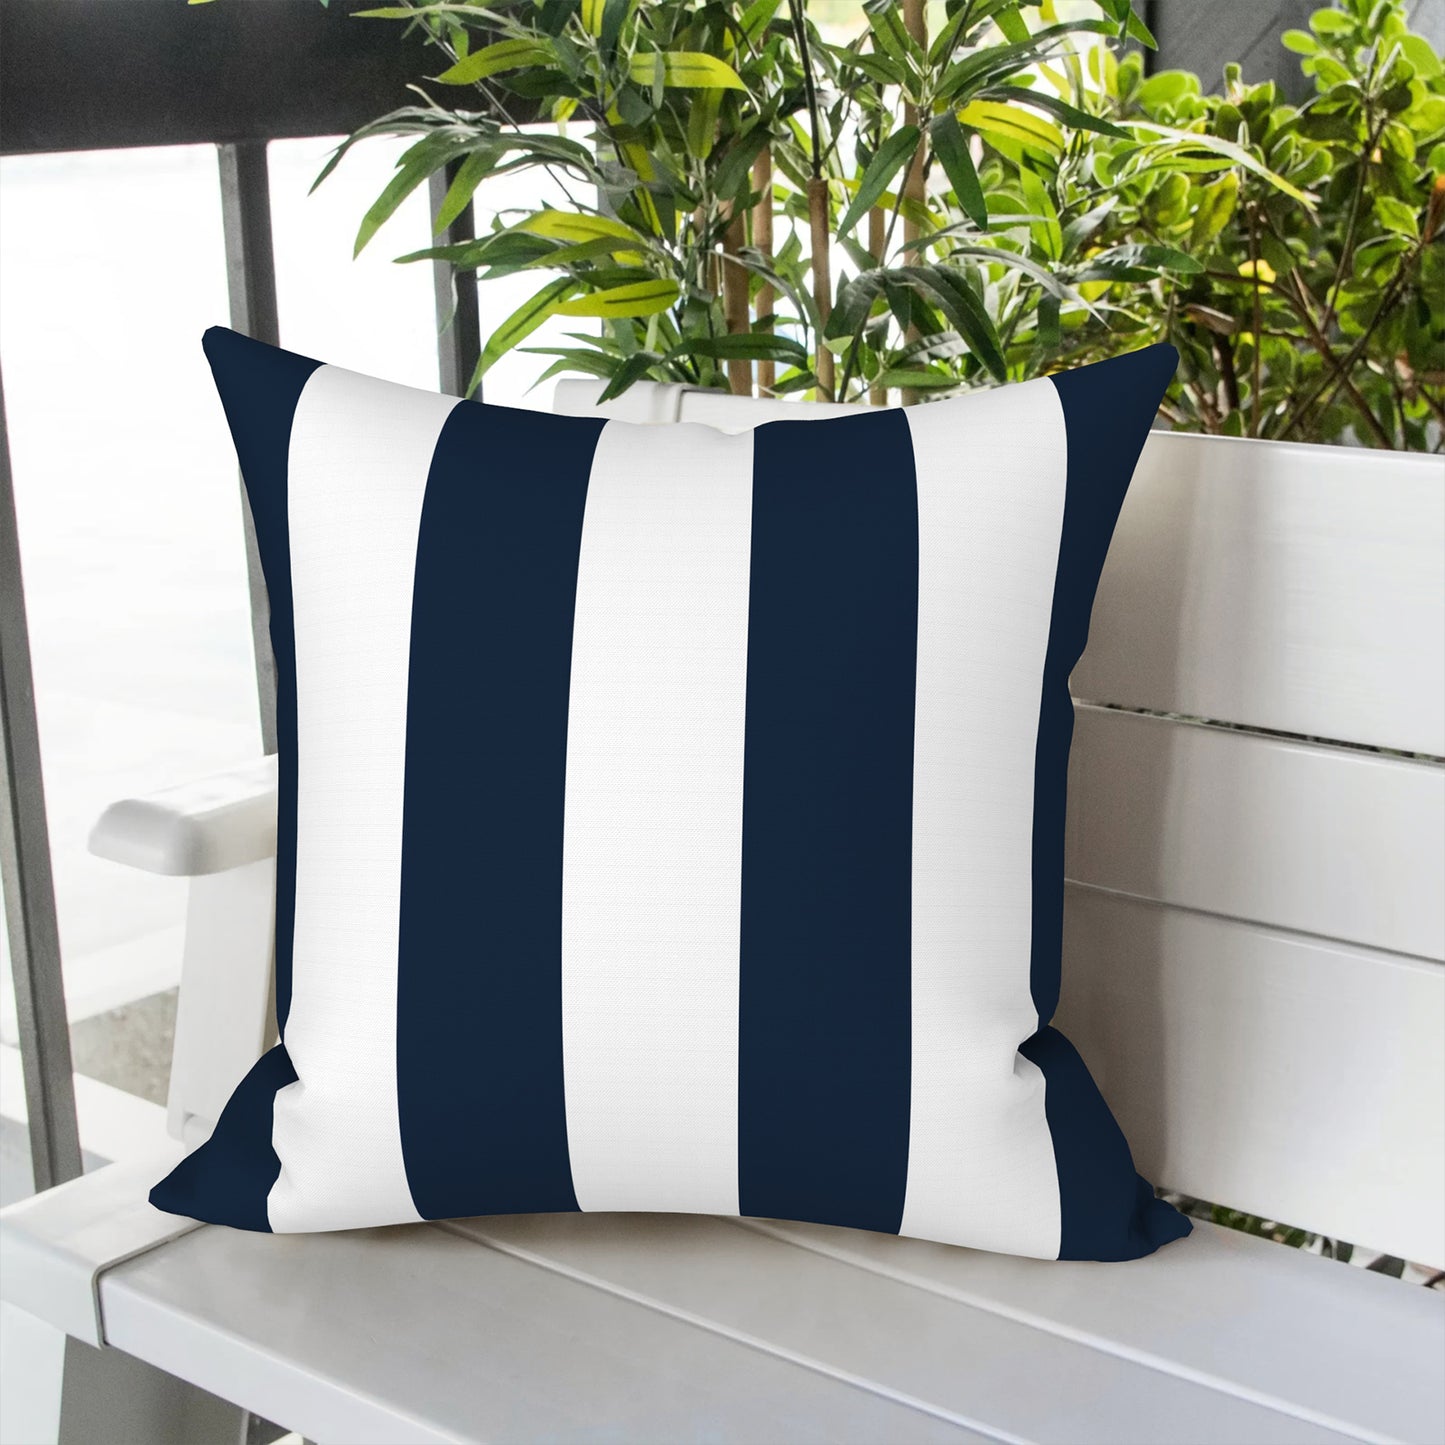 Melody Elephant Outdoor Throw Pillow Covers Pack of 2, Decorative Water Repellent Square Pillow Cases 18x18 Inch, Patio Pillowcases for Home Patio Furniture Use, Cabana Navy